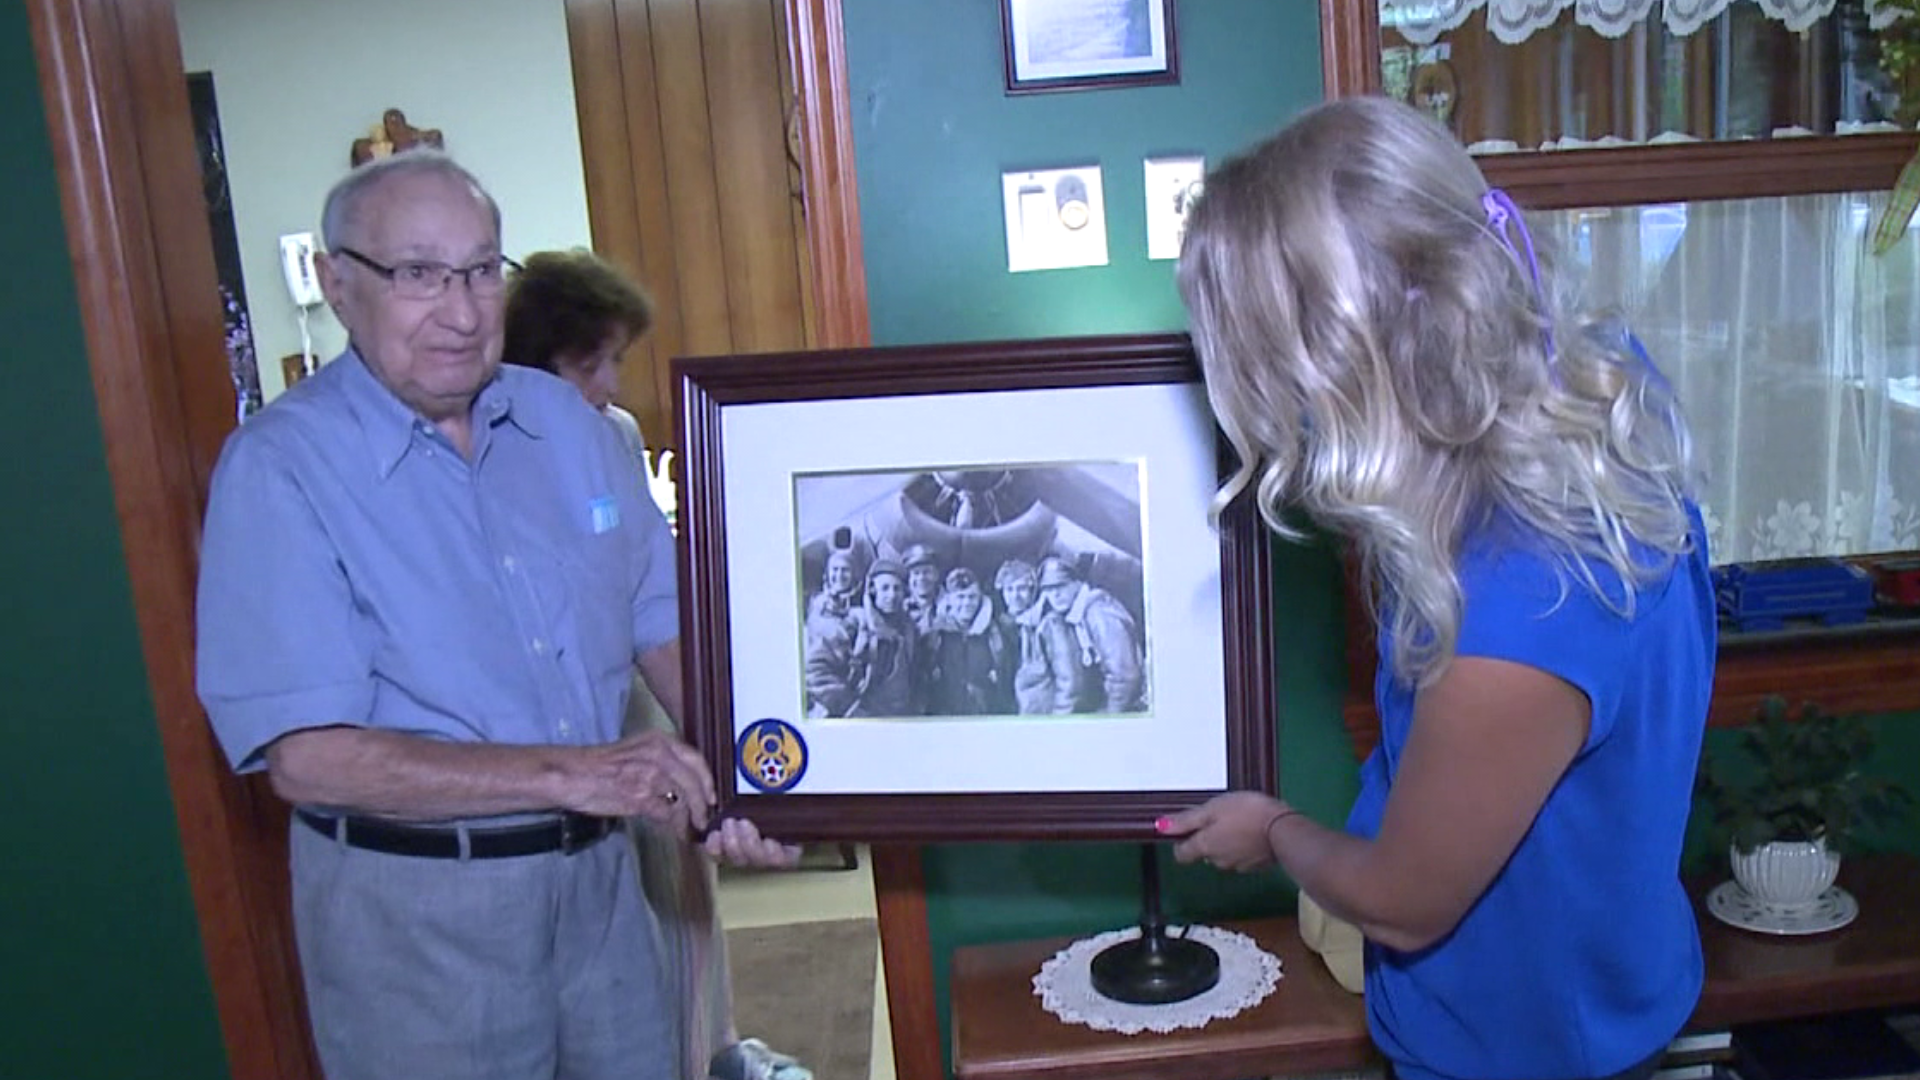 Pat Solano, a decorated World War II Veteran and public servant, passed away on Saturday.